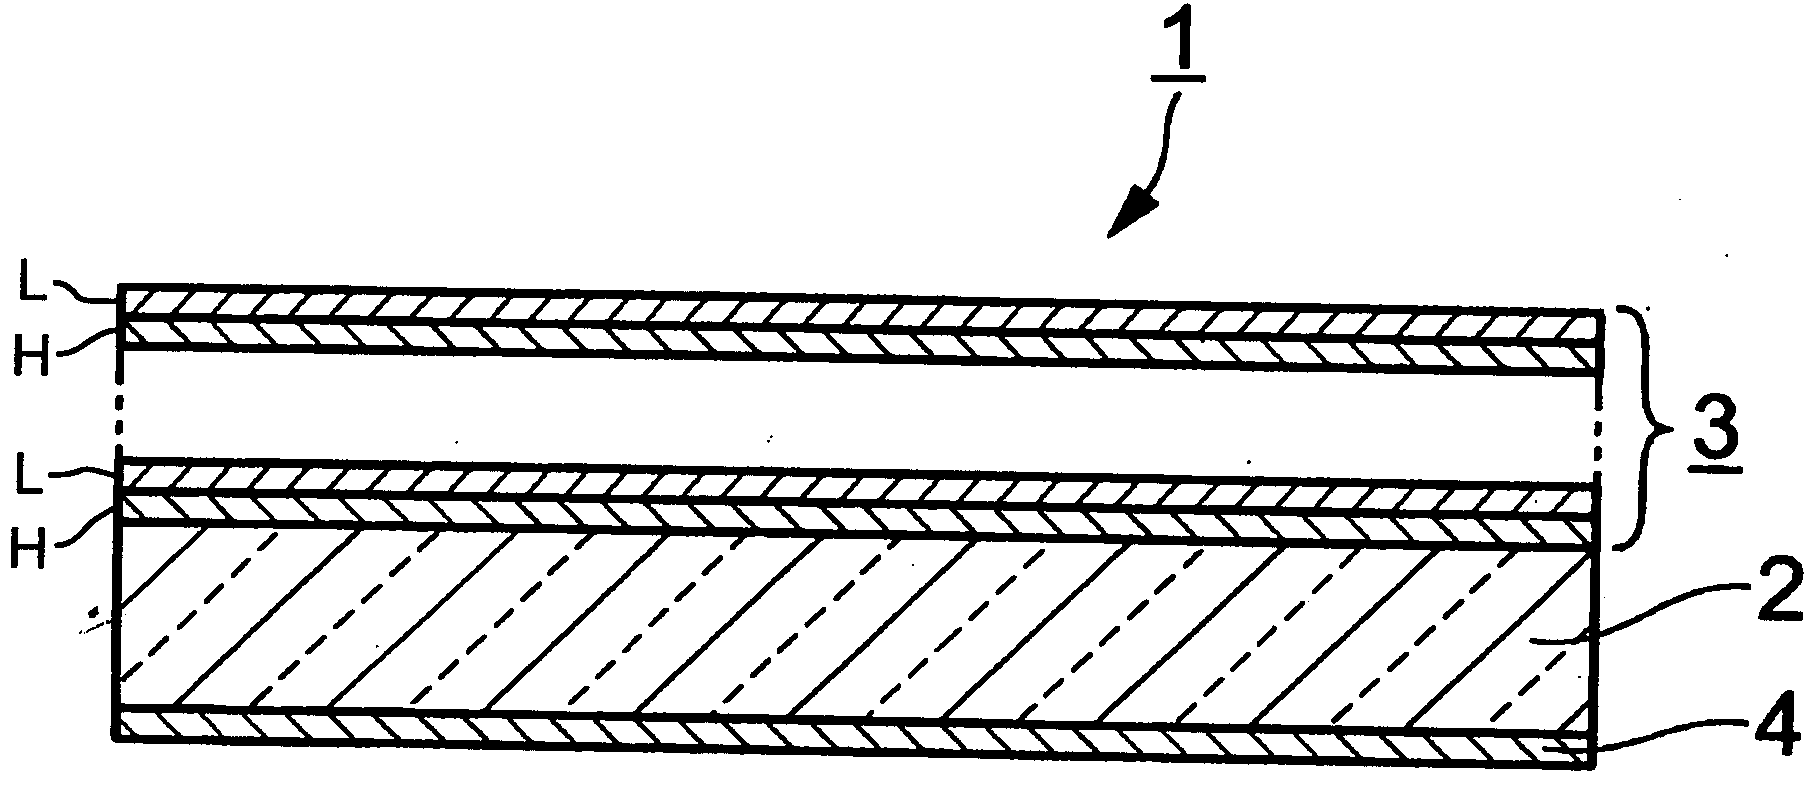 Optical multilayer-film filter, method for fabricating optical multilayer-film filter, optical low-pass filter, and electronic apparatus